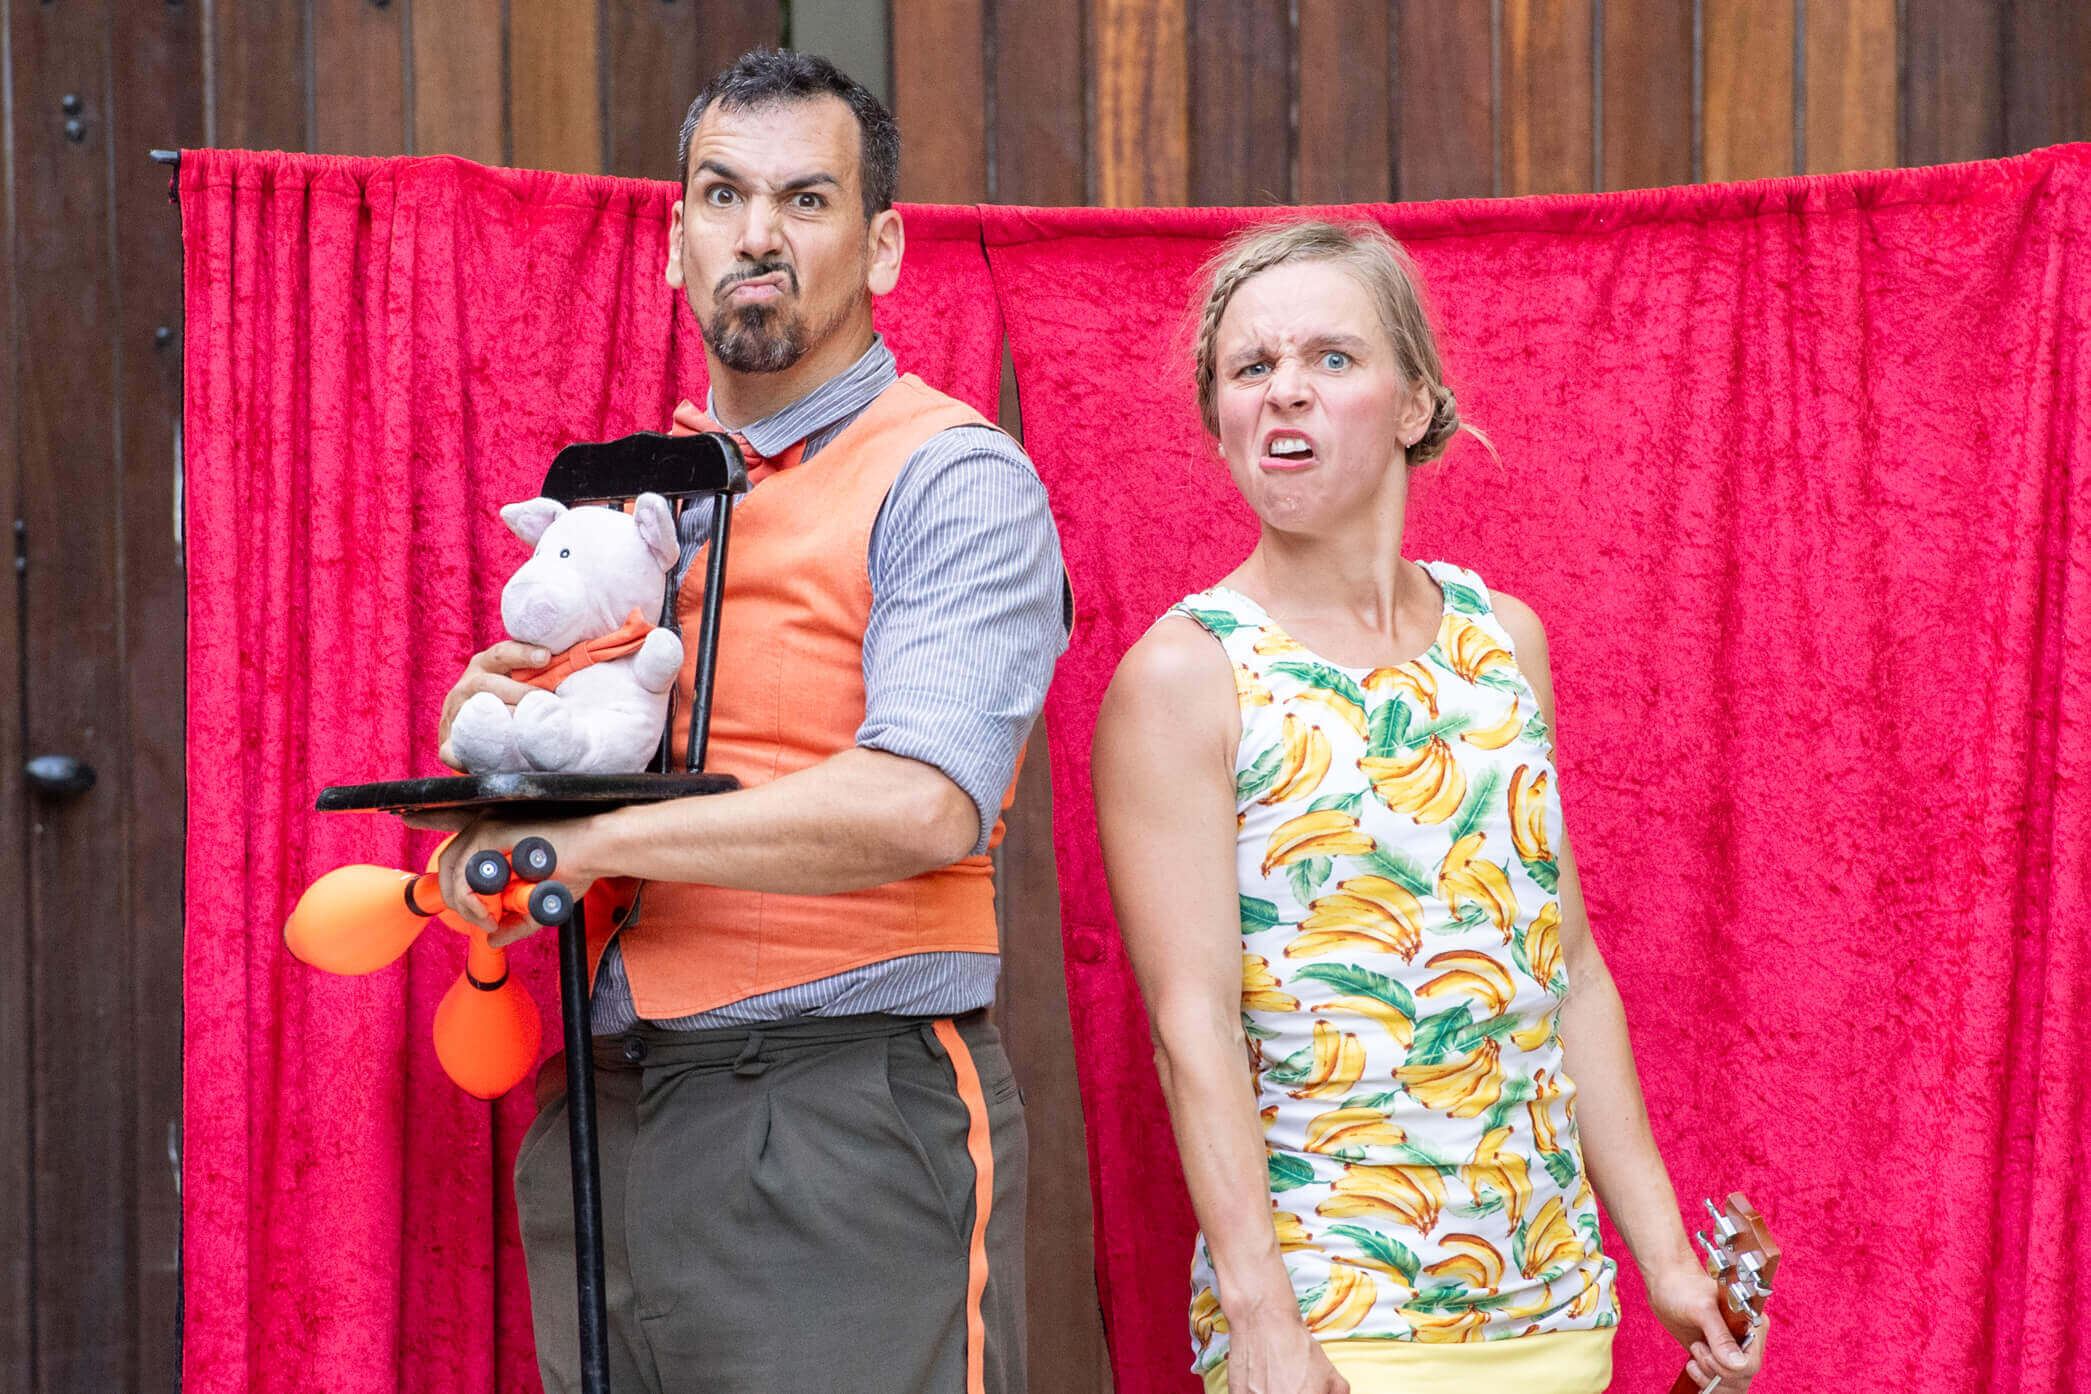 Male artist with pig puppet, female artist with surprised expression, outdoor circus performance, red curtain.